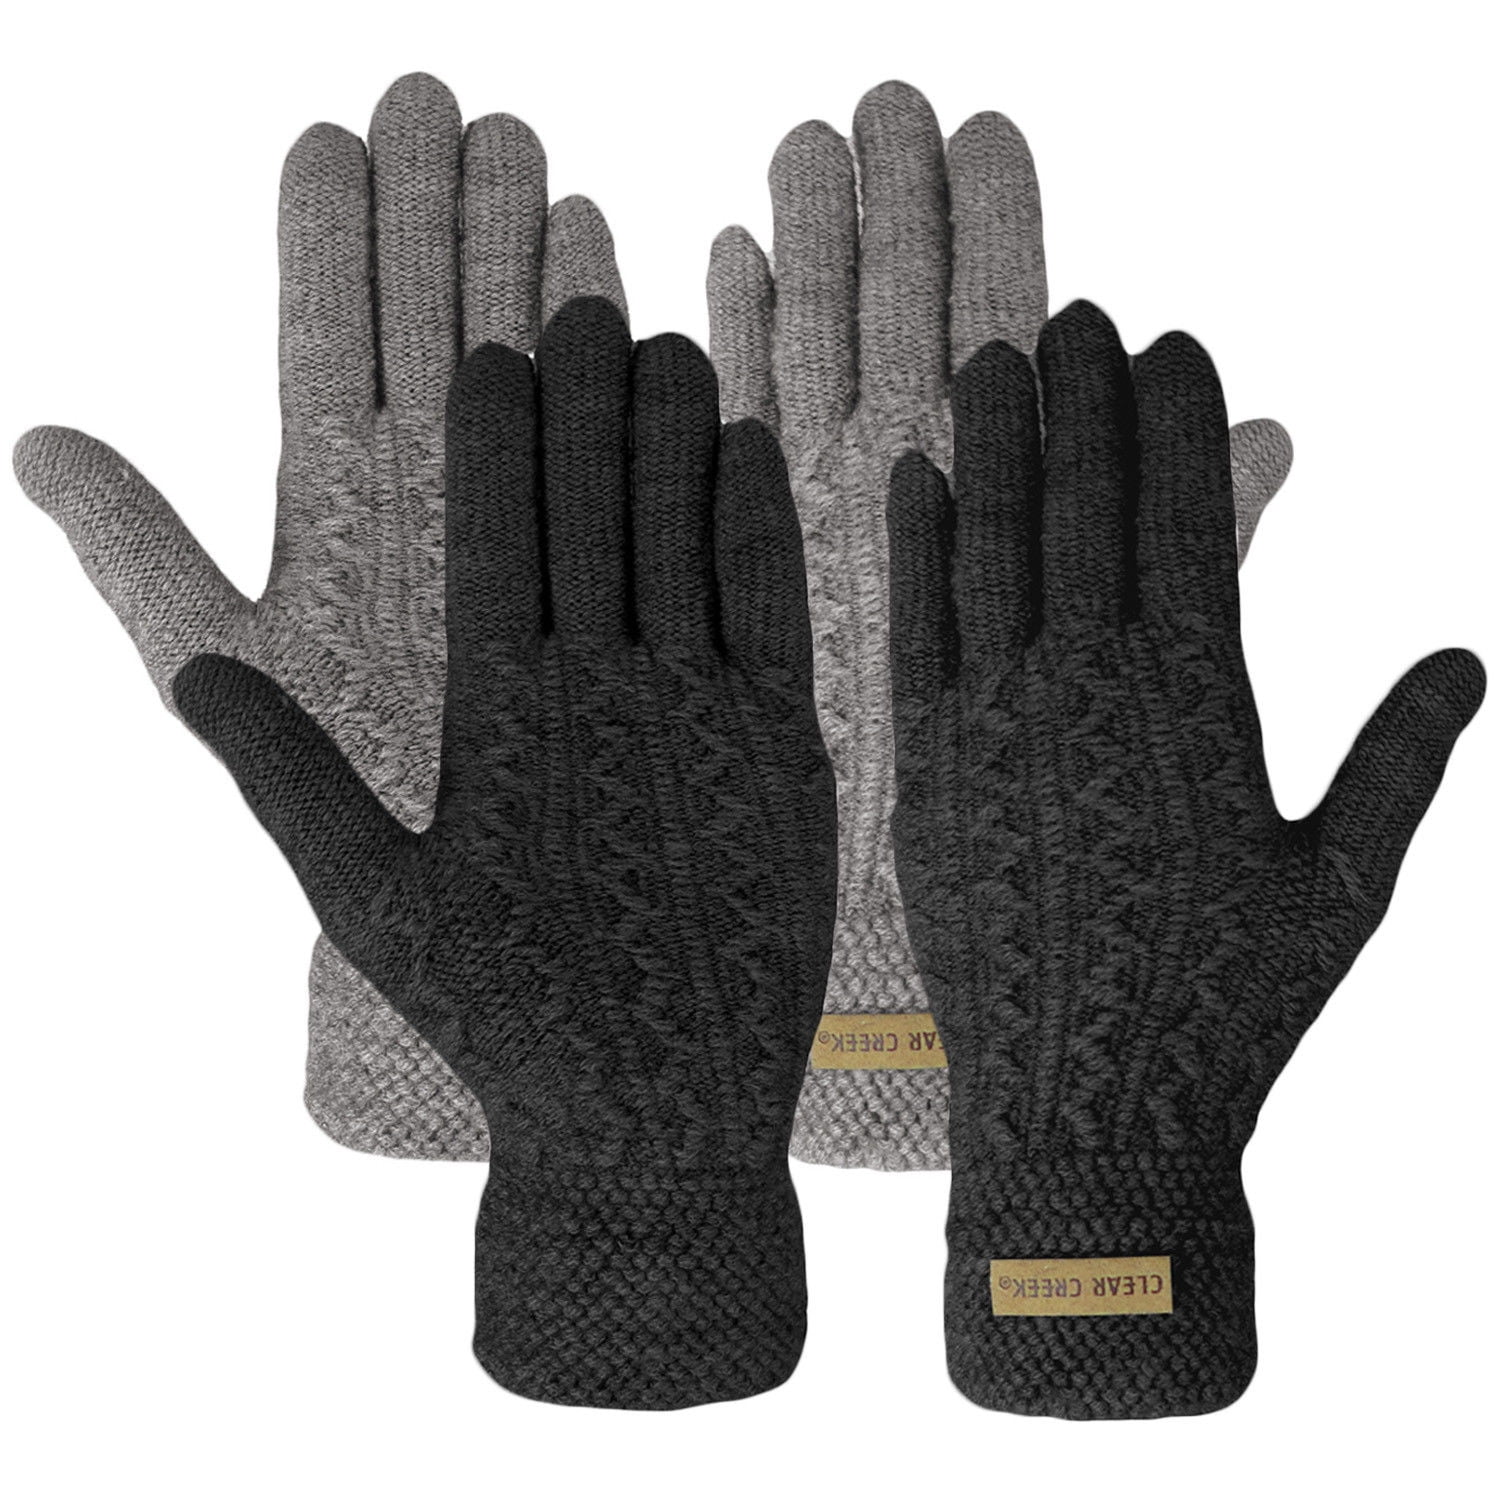 12 Pairs Winter Knit Glove for Women and Men,Touch Screen Magic Gloves Warm 